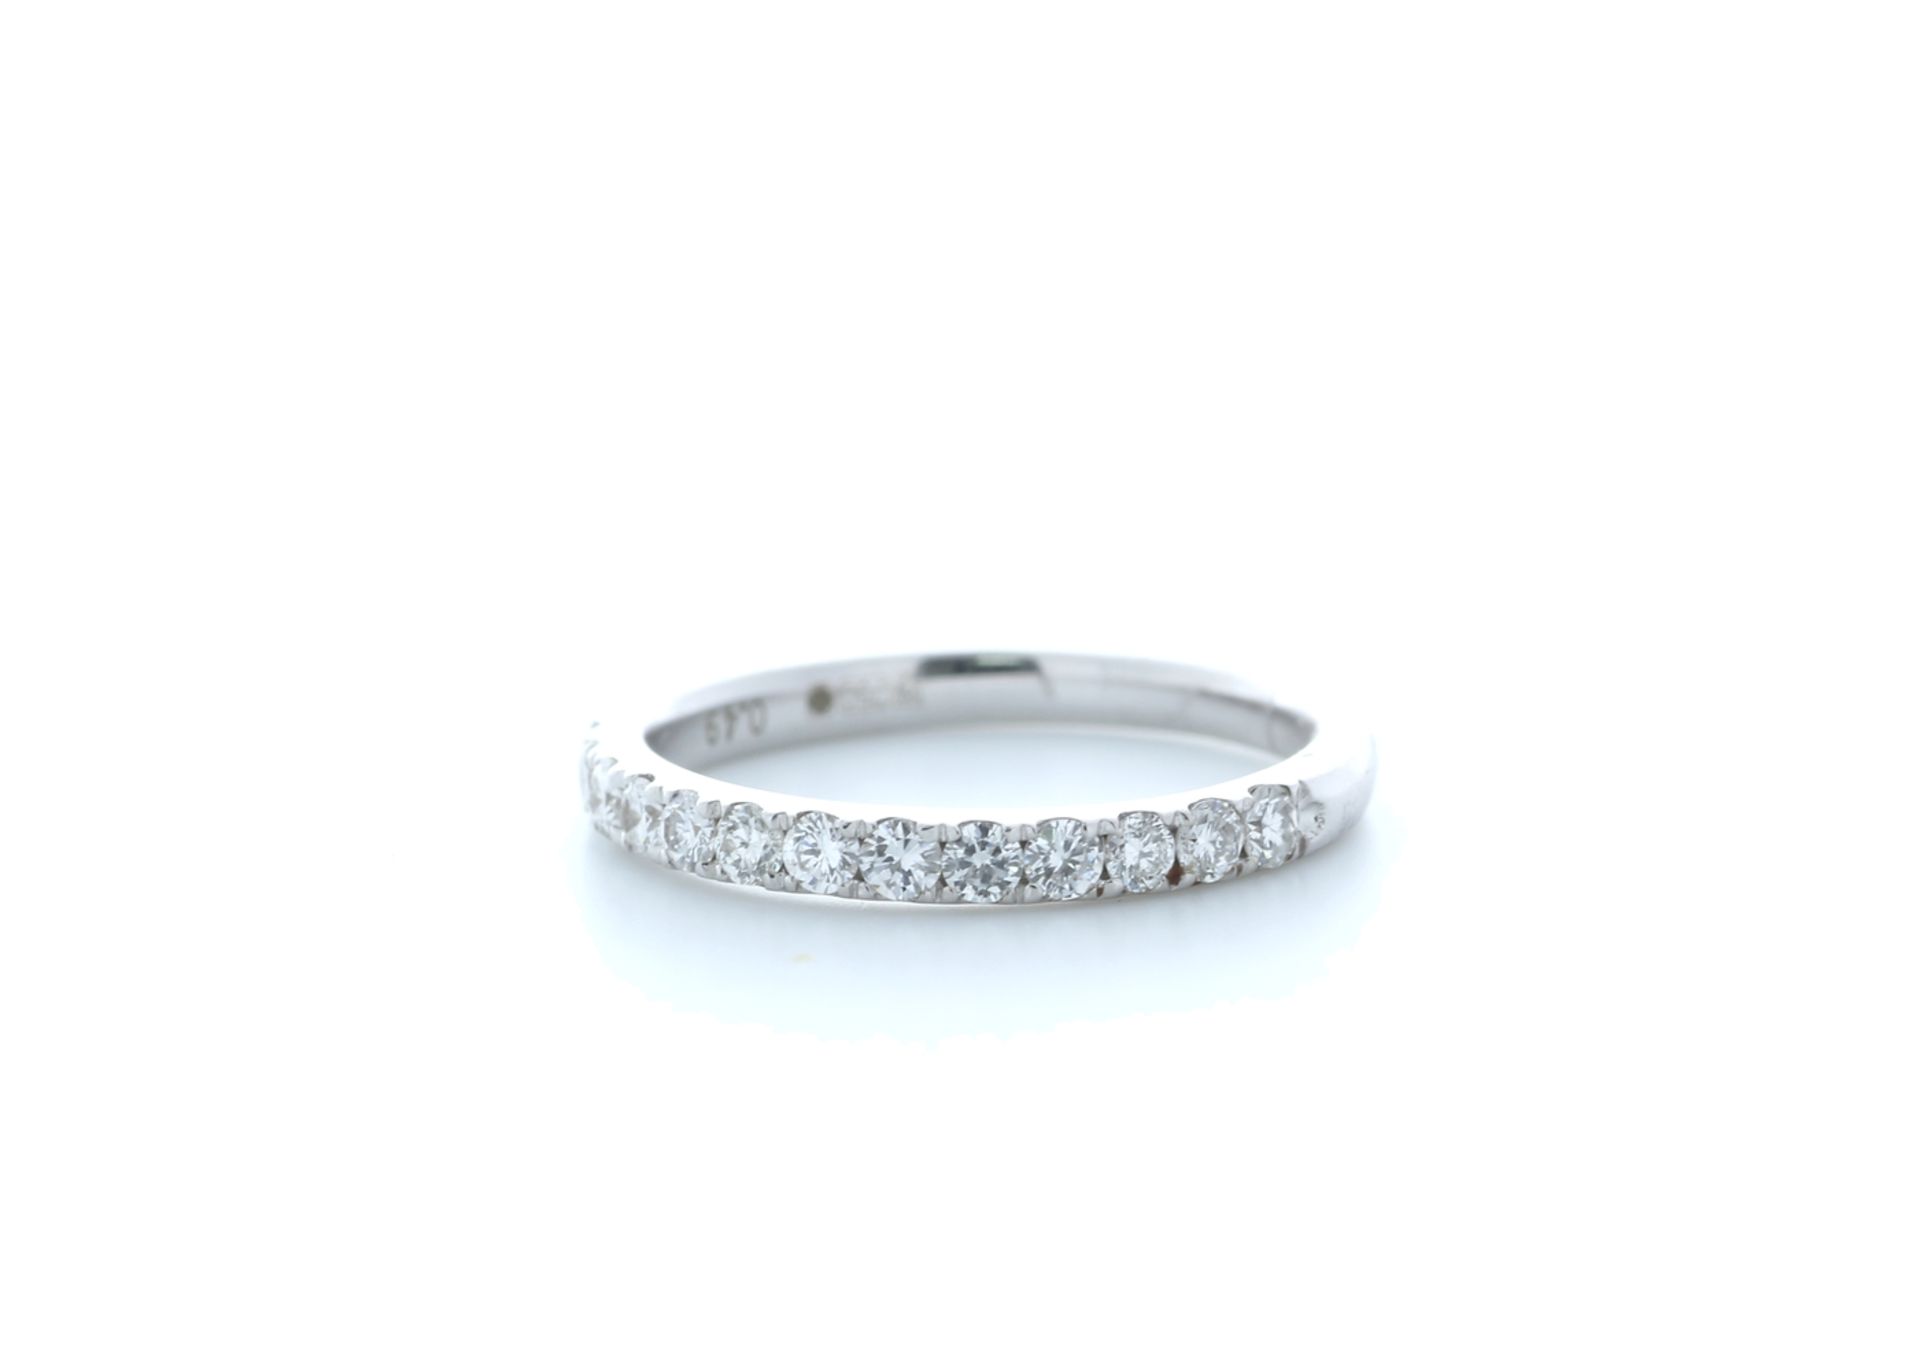 18ct White Gold Claw Set Semi Eternity Diamond Ring 0.17 Carats - Valued by IDI £2,250.00 - 18ct - Image 2 of 5